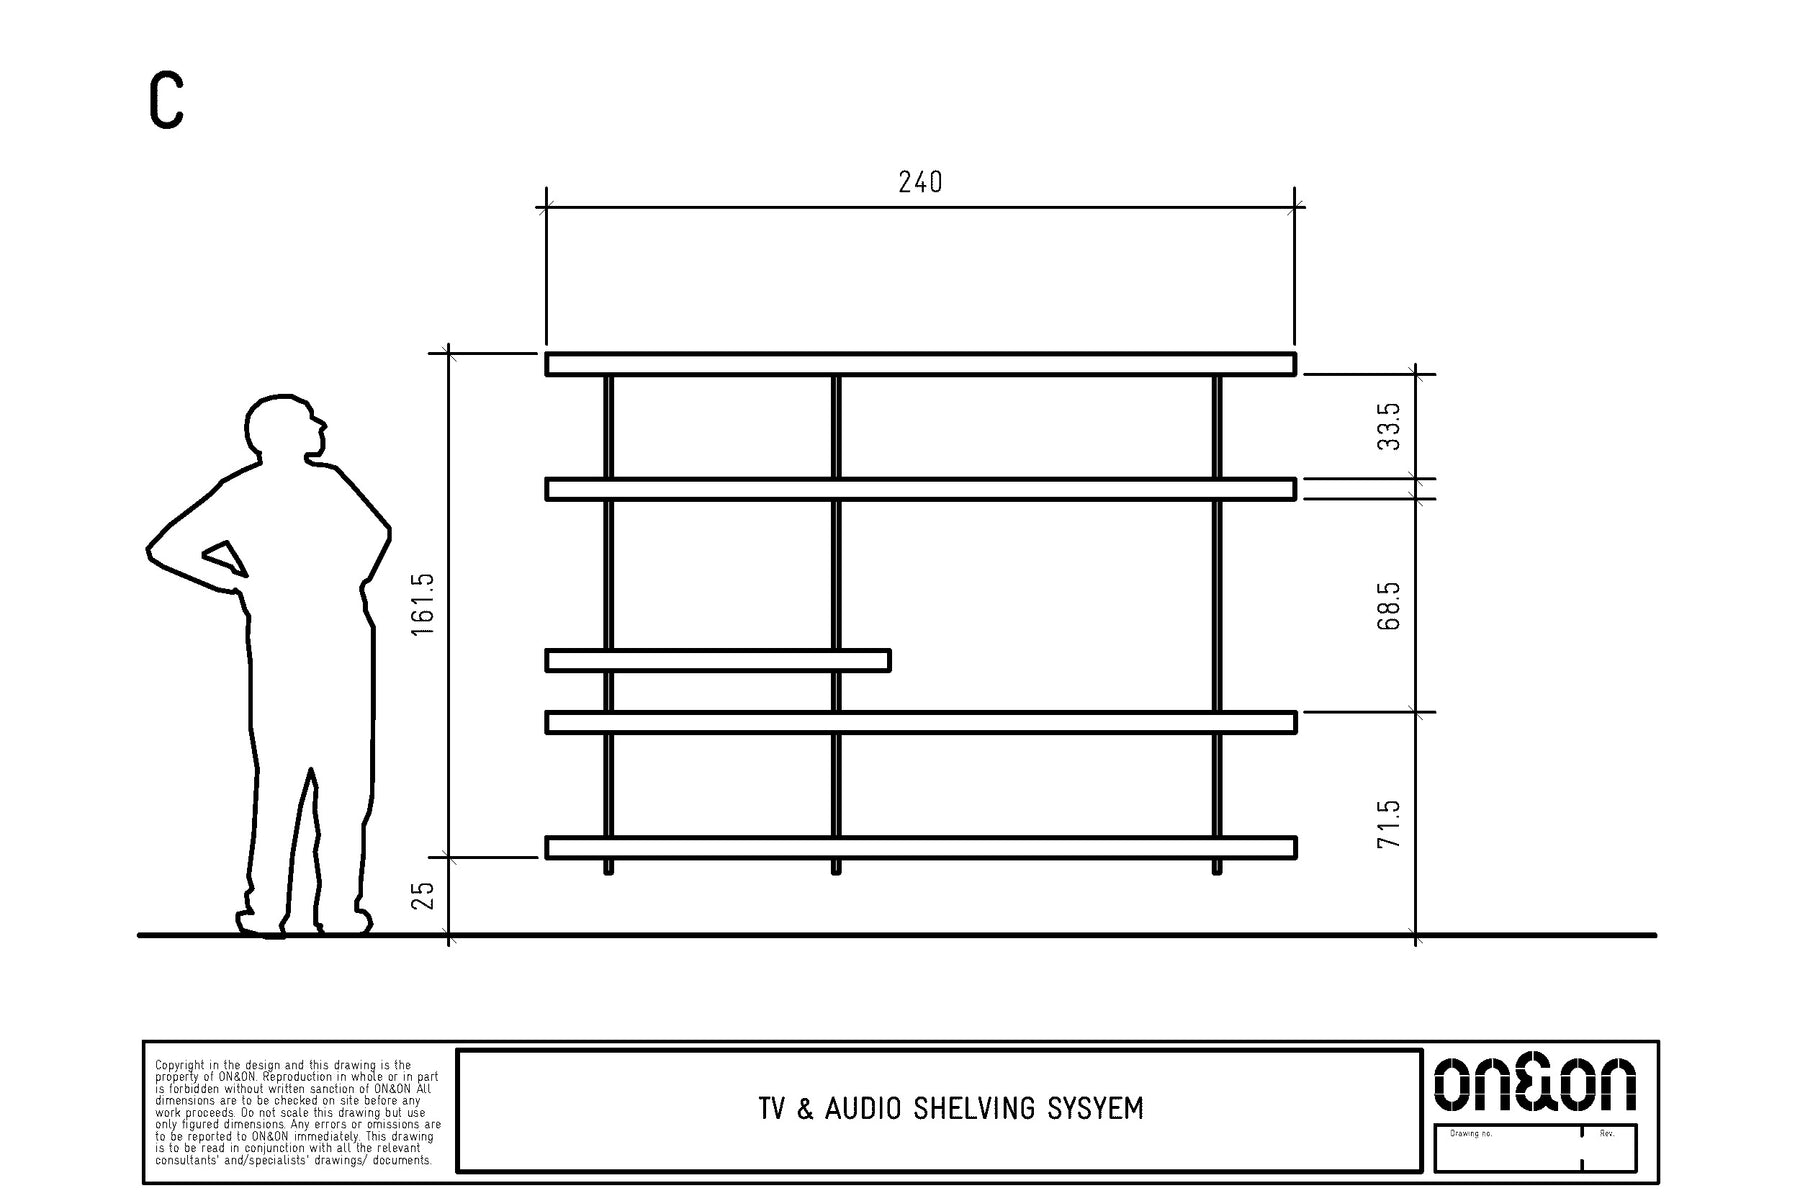 Modular shelving system C drawing with dimensions